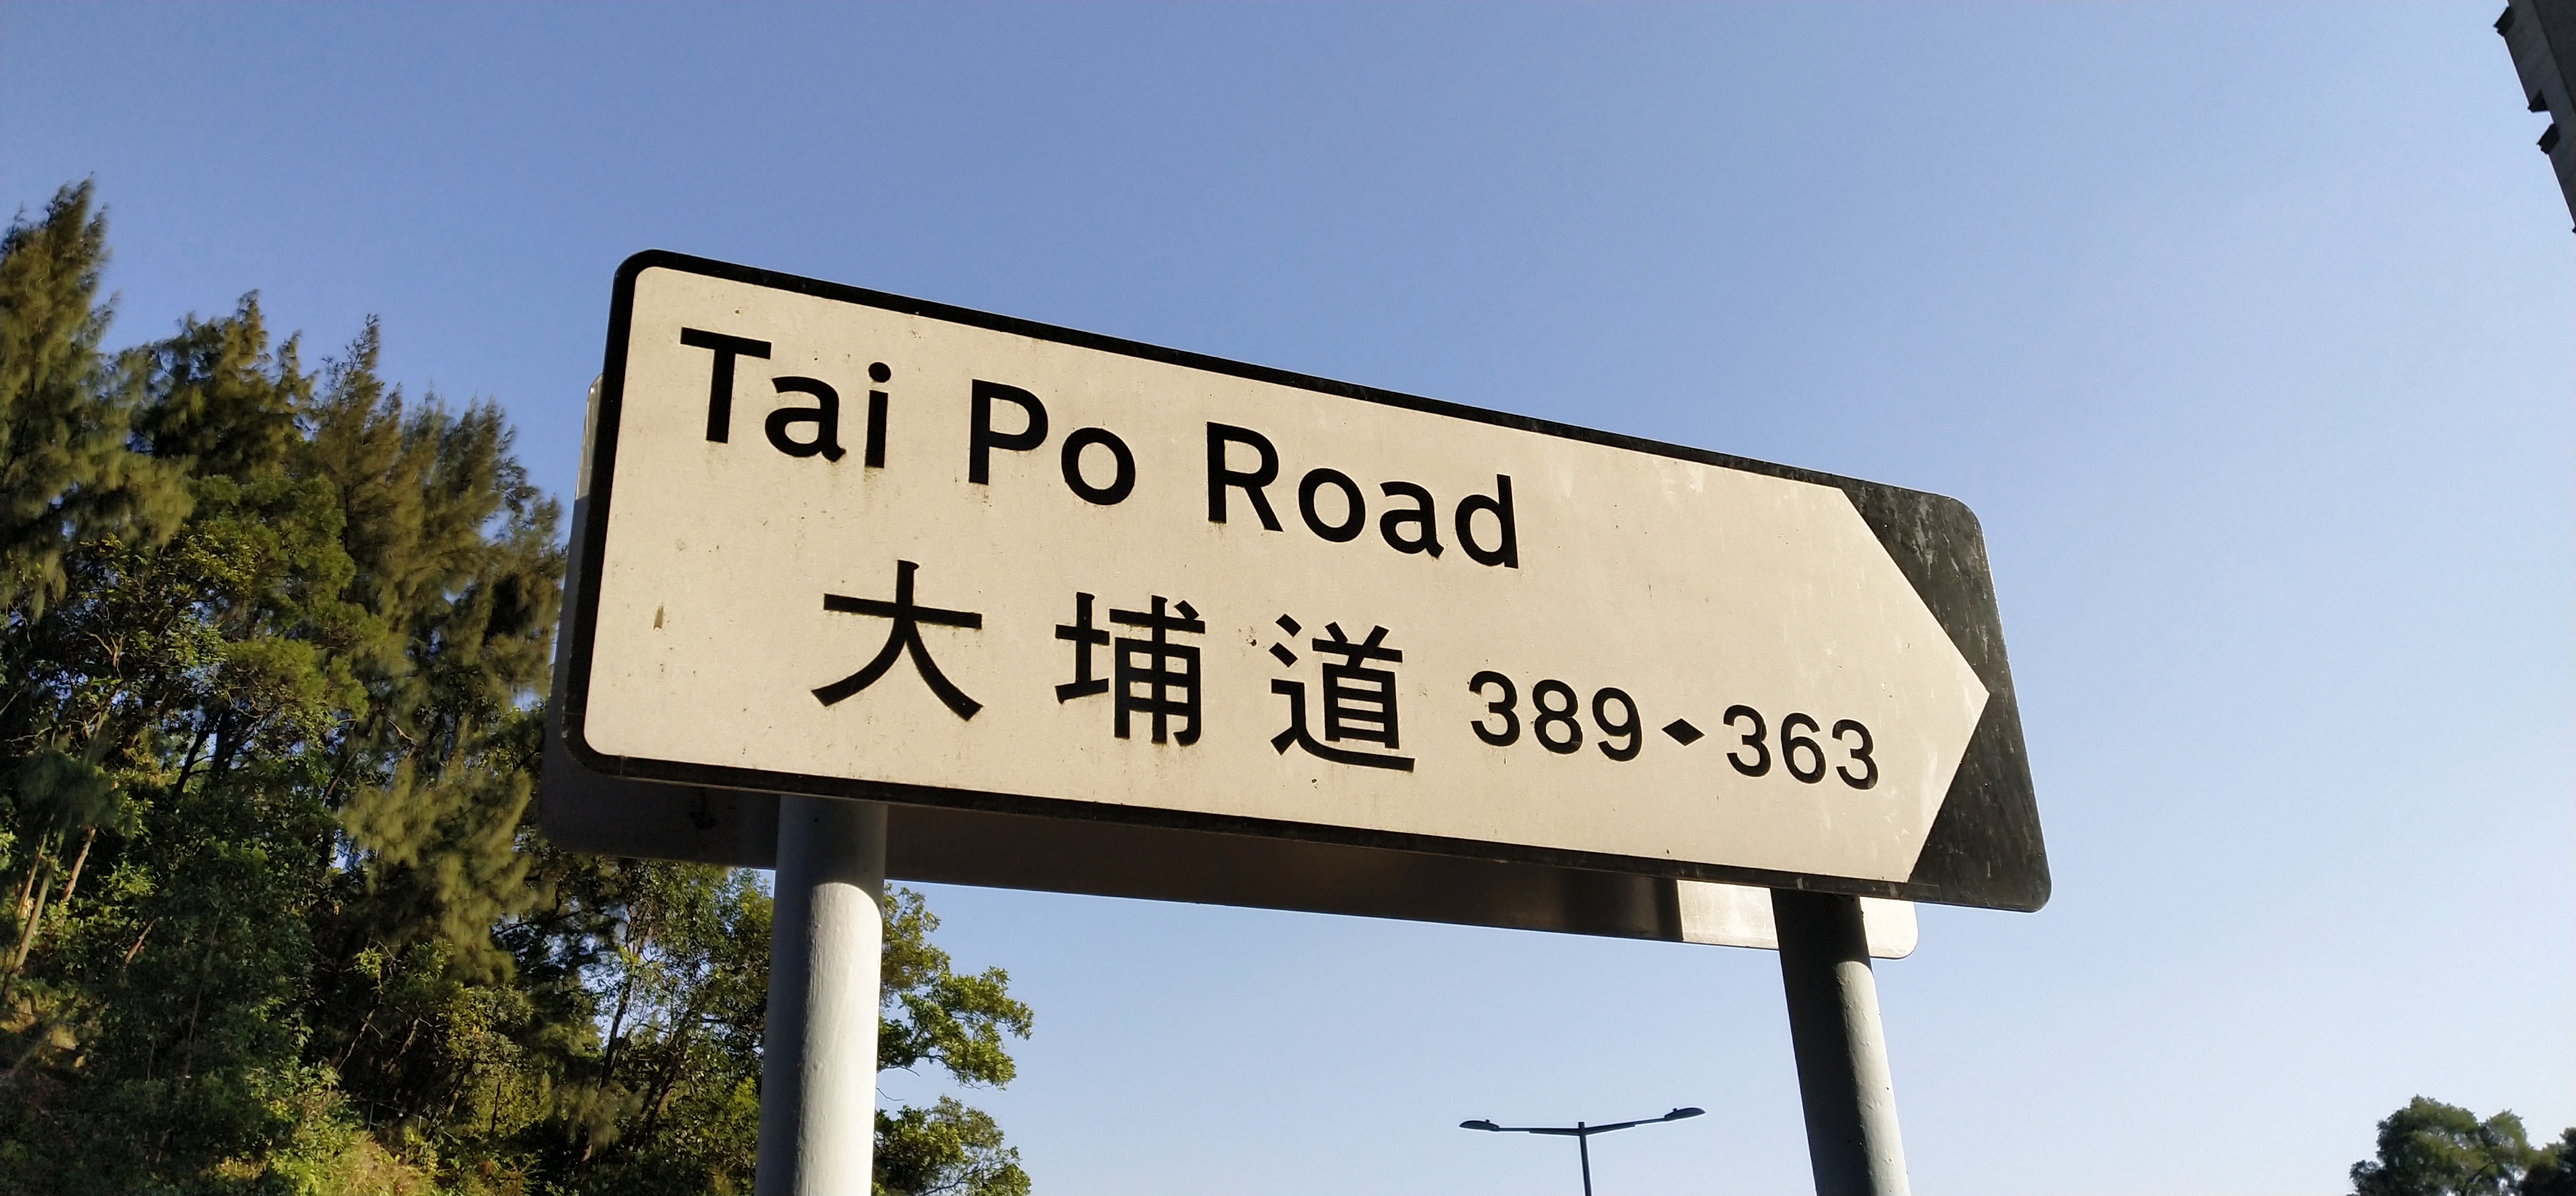 Travelers need to use the Tai Po Road to go to Kam Shan Country Park.